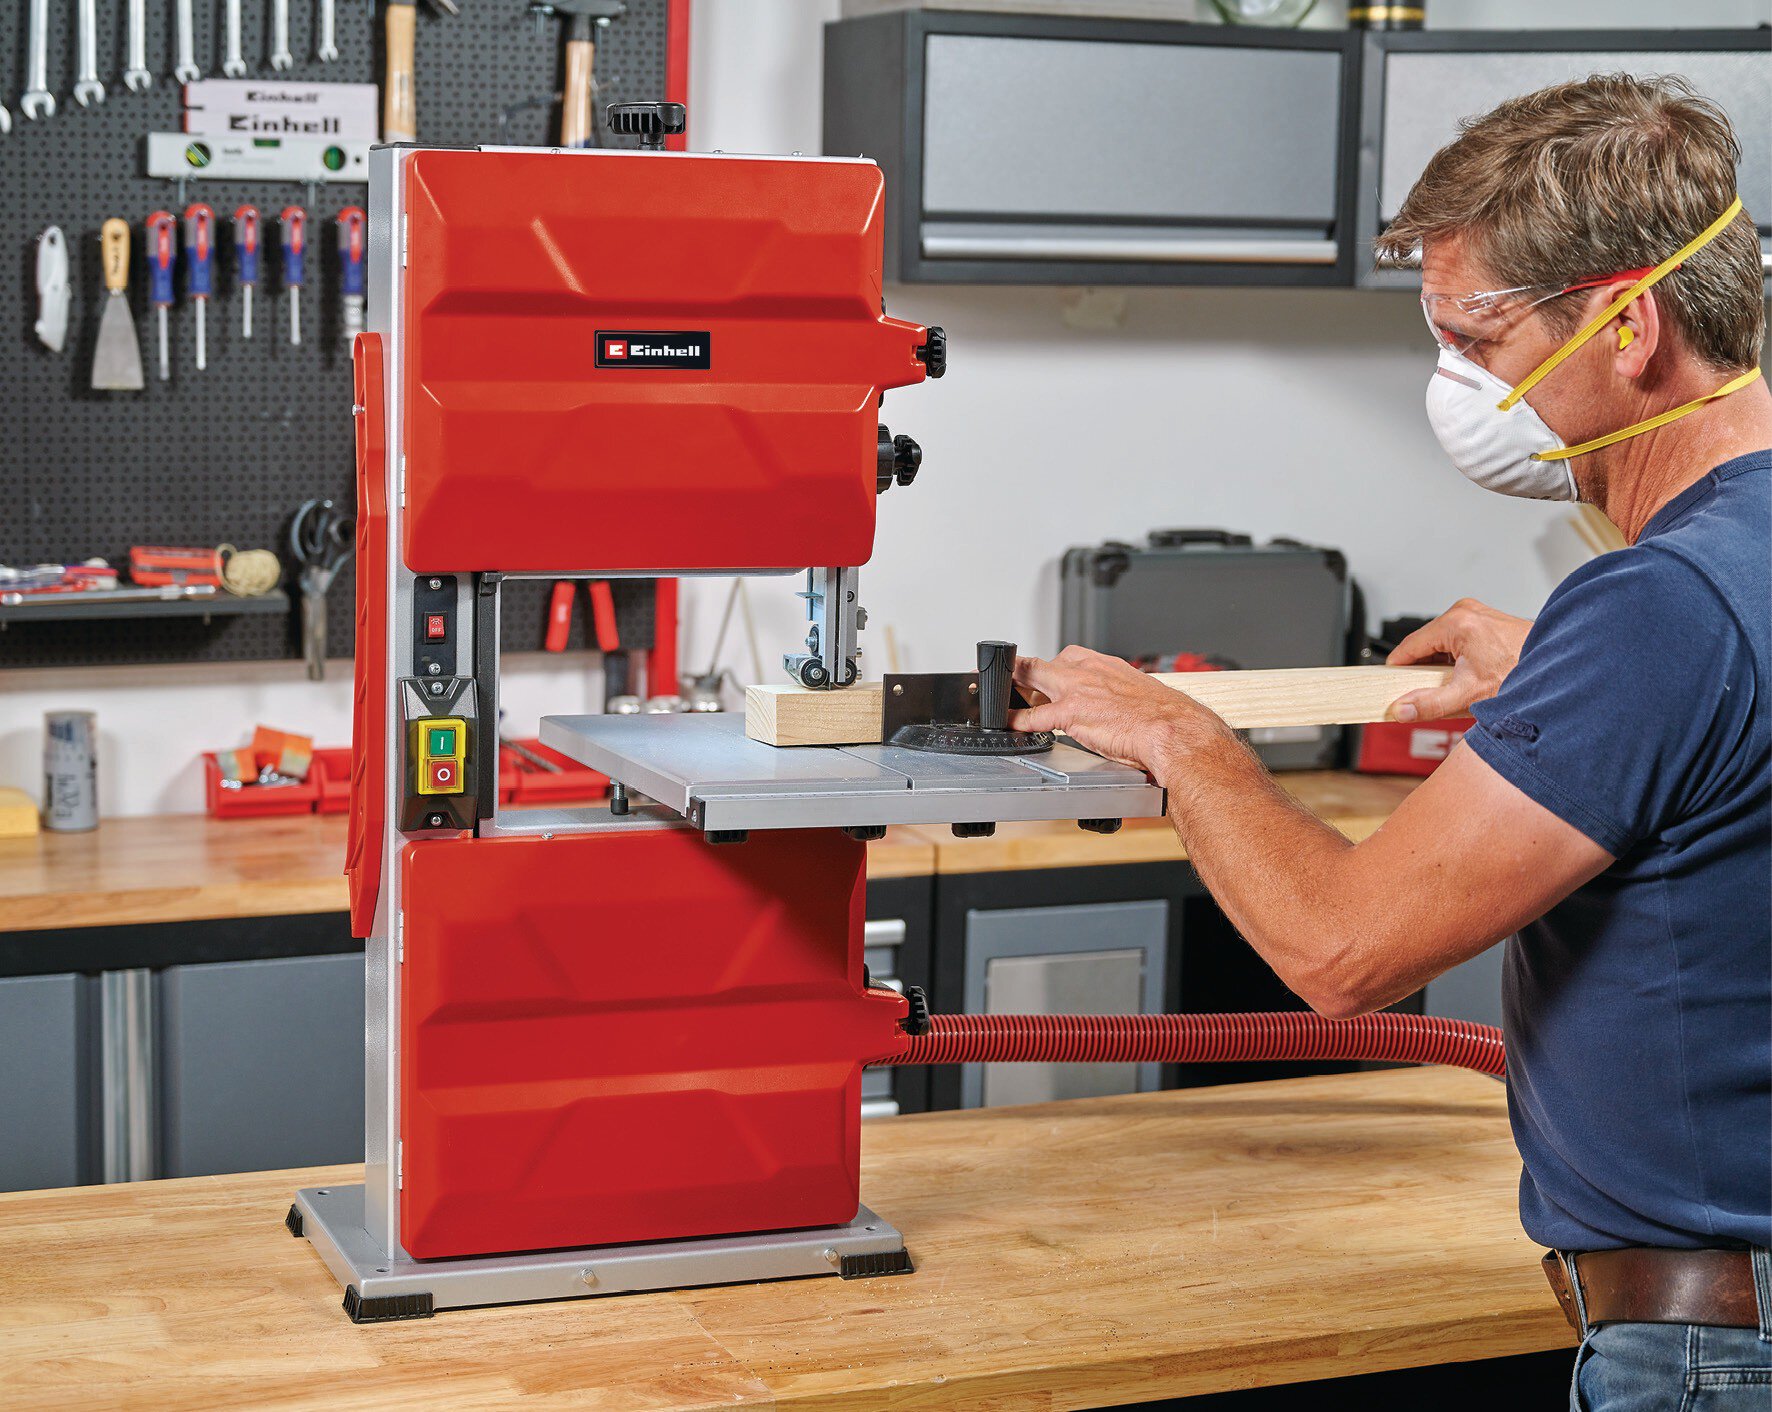 einhell-classic-band-saw-4308035-example_usage-001